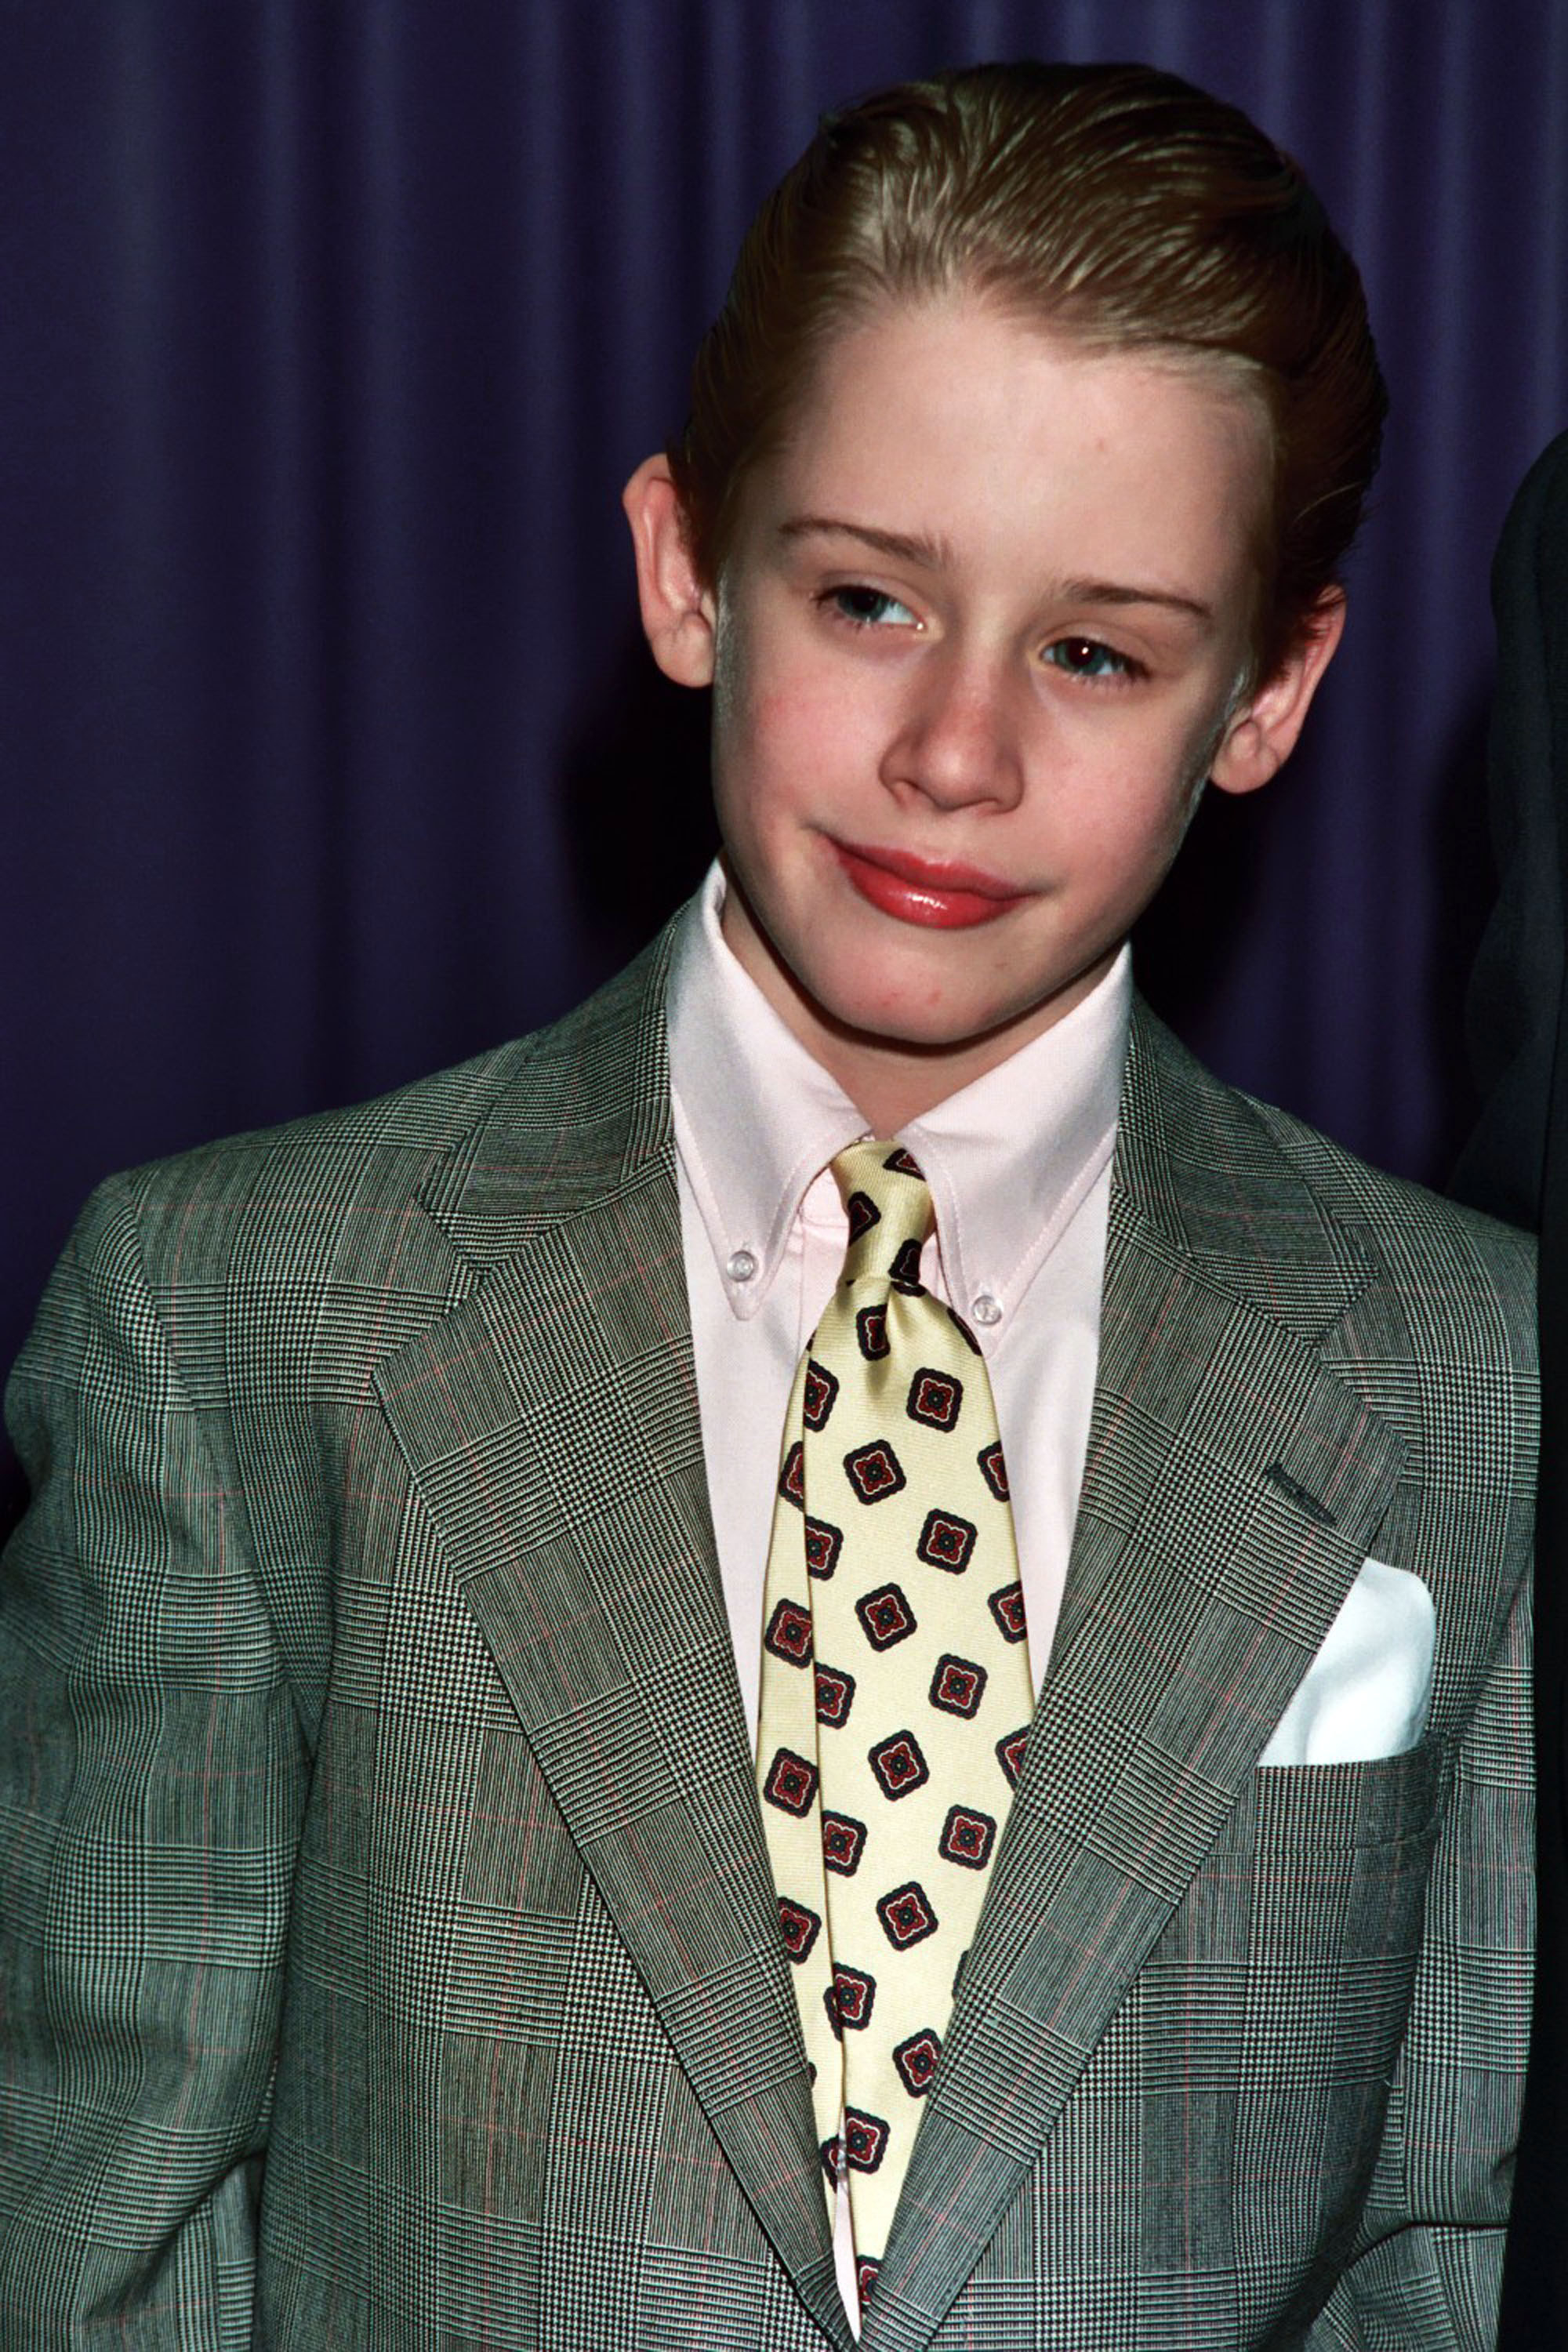 A photo of Macaulay as a kid, wearing a gray tweed suit jacket with a pale yellow tie with red and black squares on it